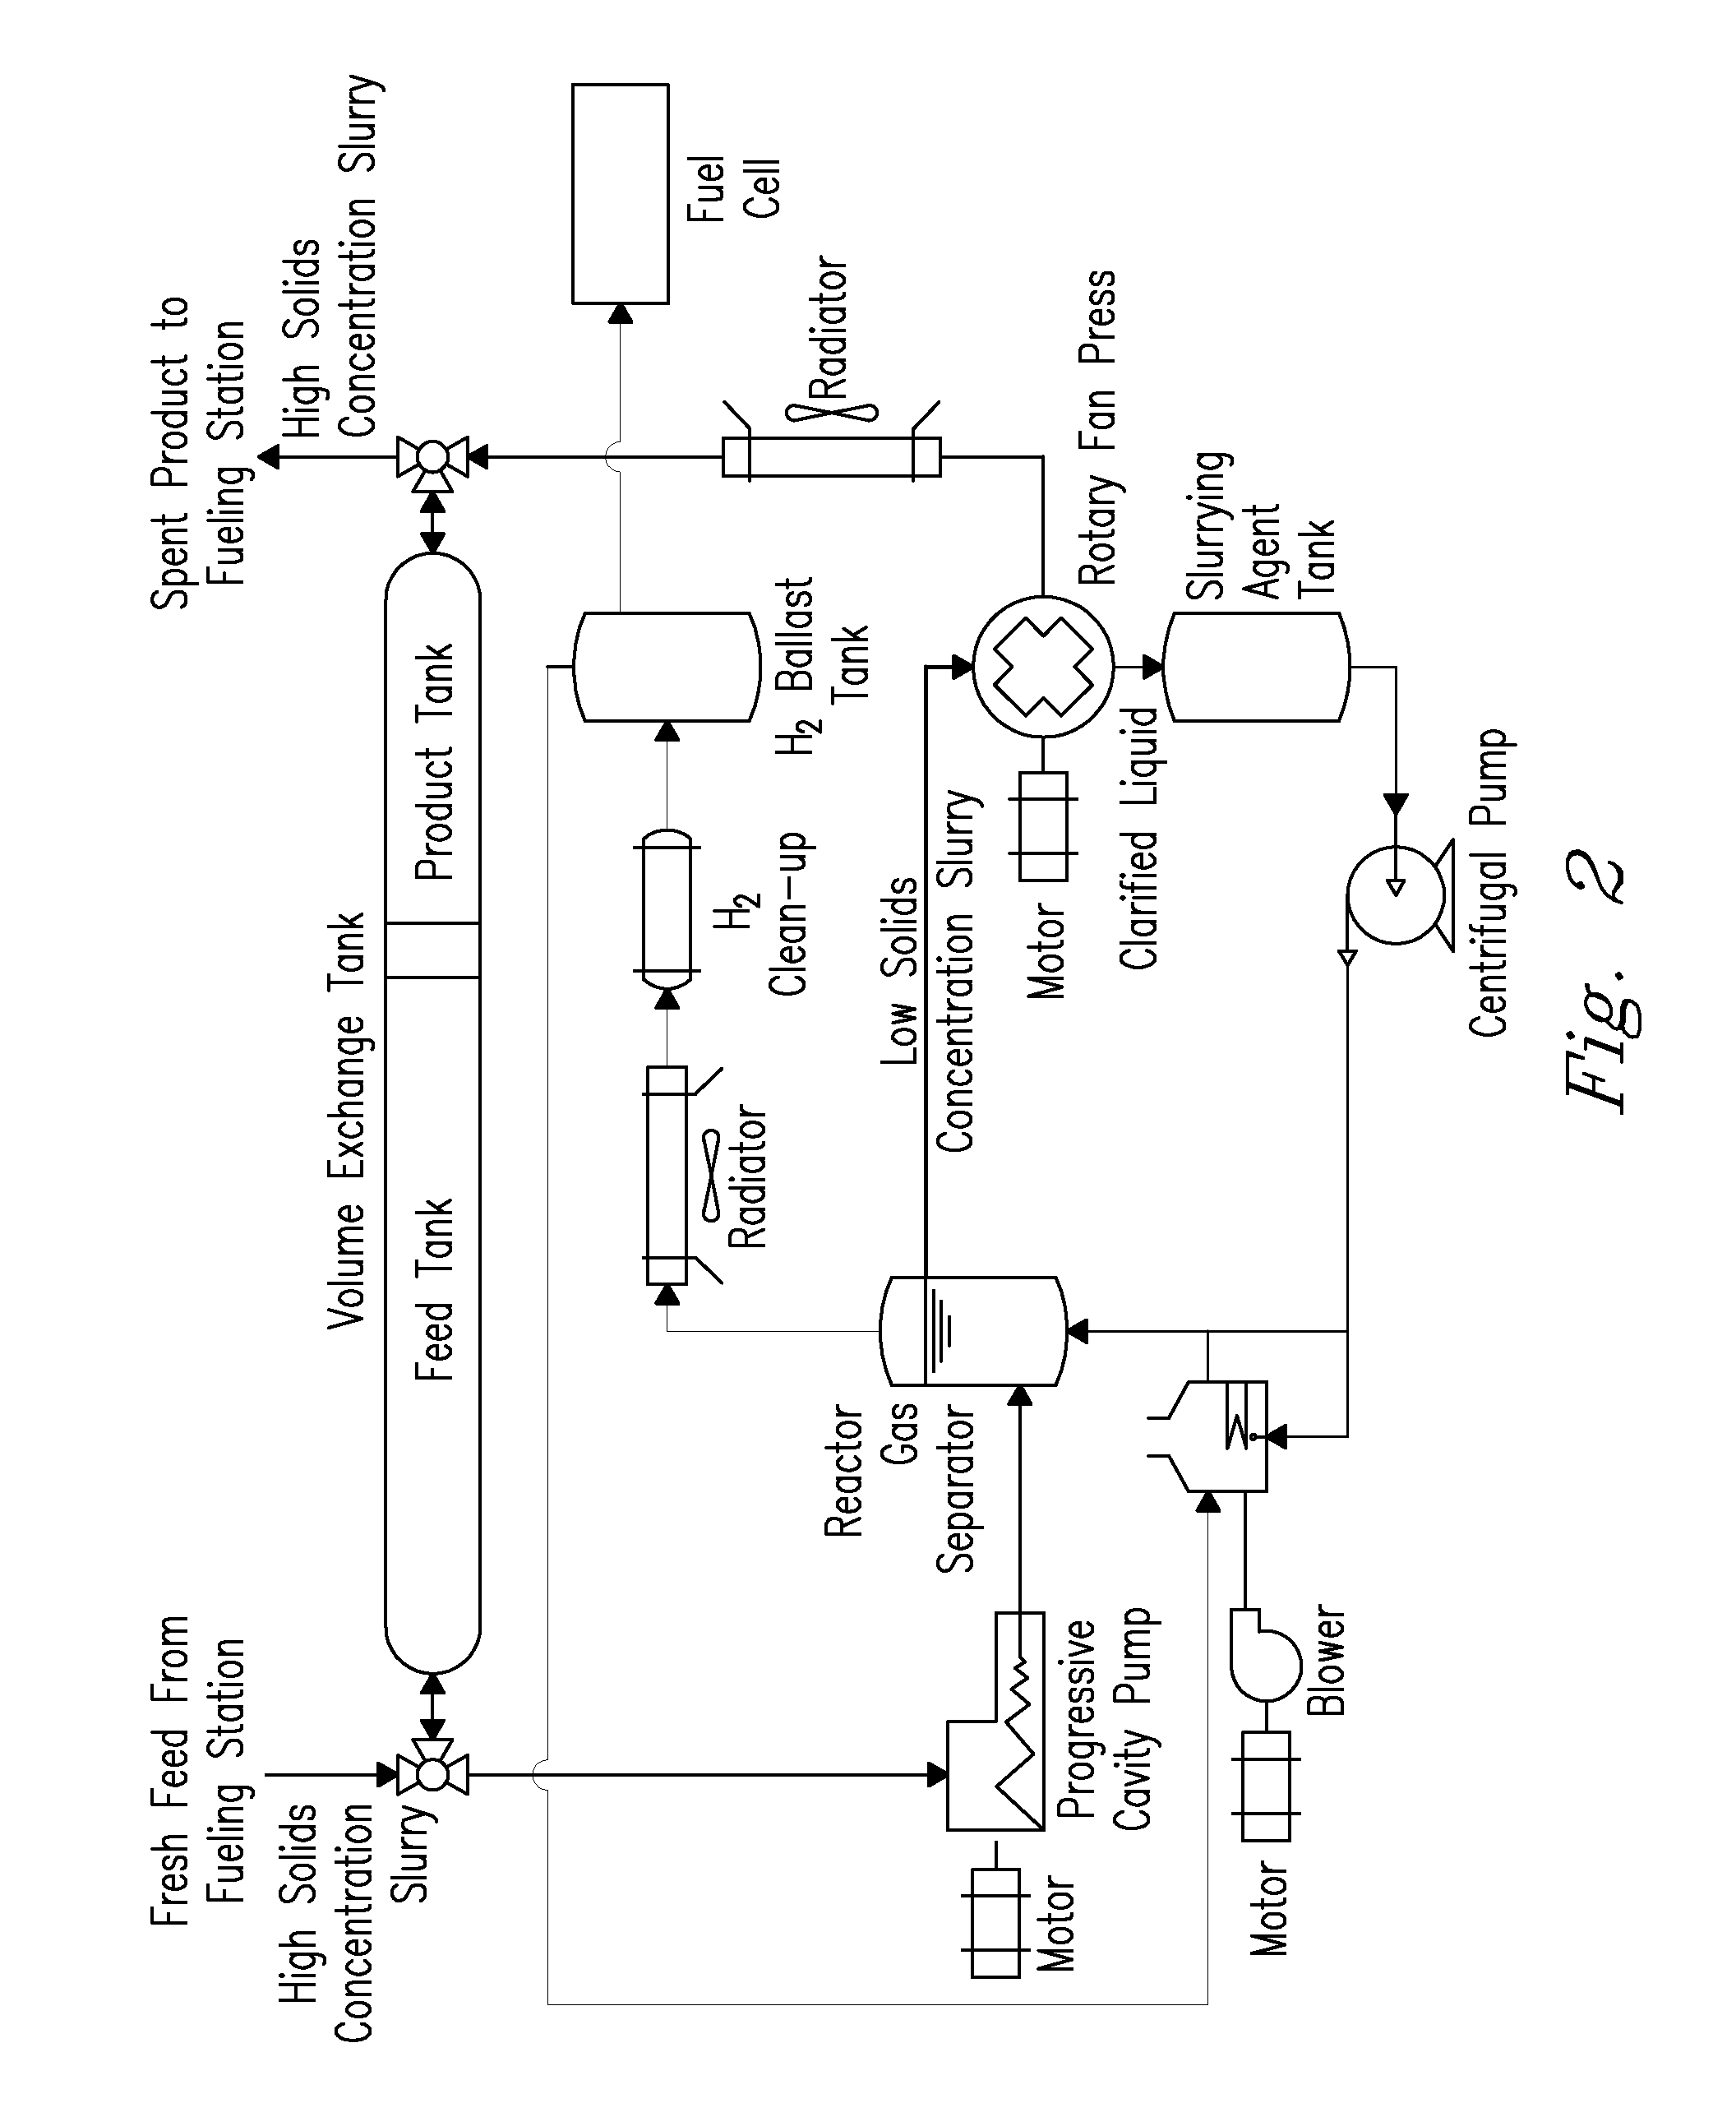 Combined on-board hydride slurry storage and reactor system and process for hydrogen-powered vehicles and devices